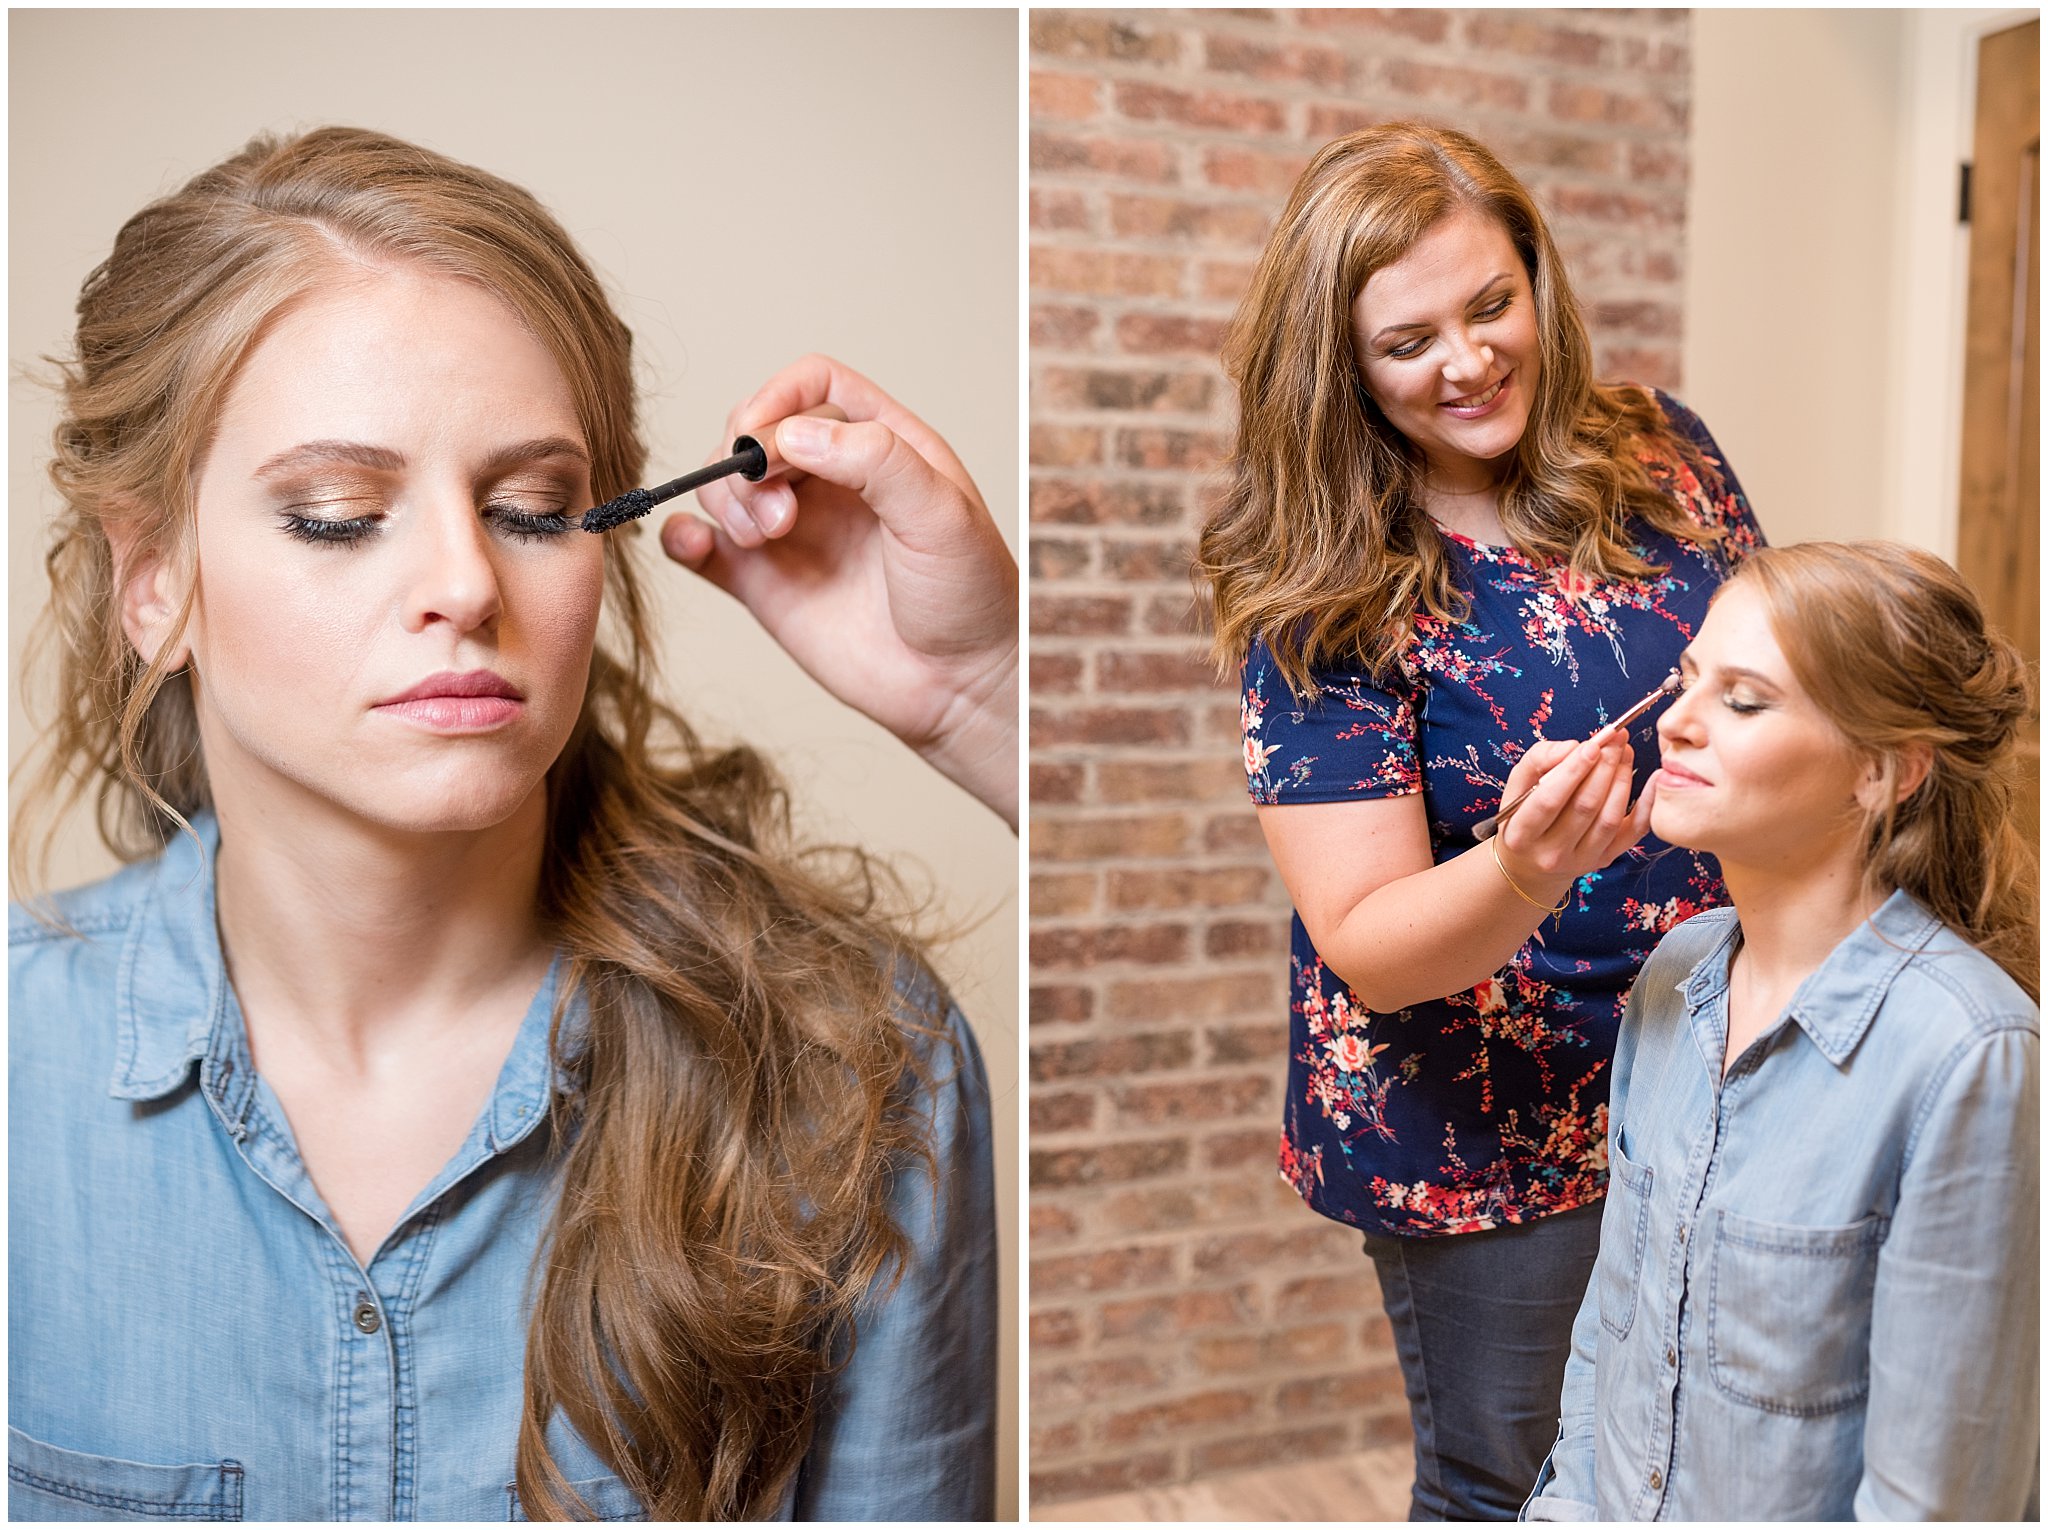 Bride getting ready and getting makeup on with makeup artist | Talia Event Center | Jessie and Dallin